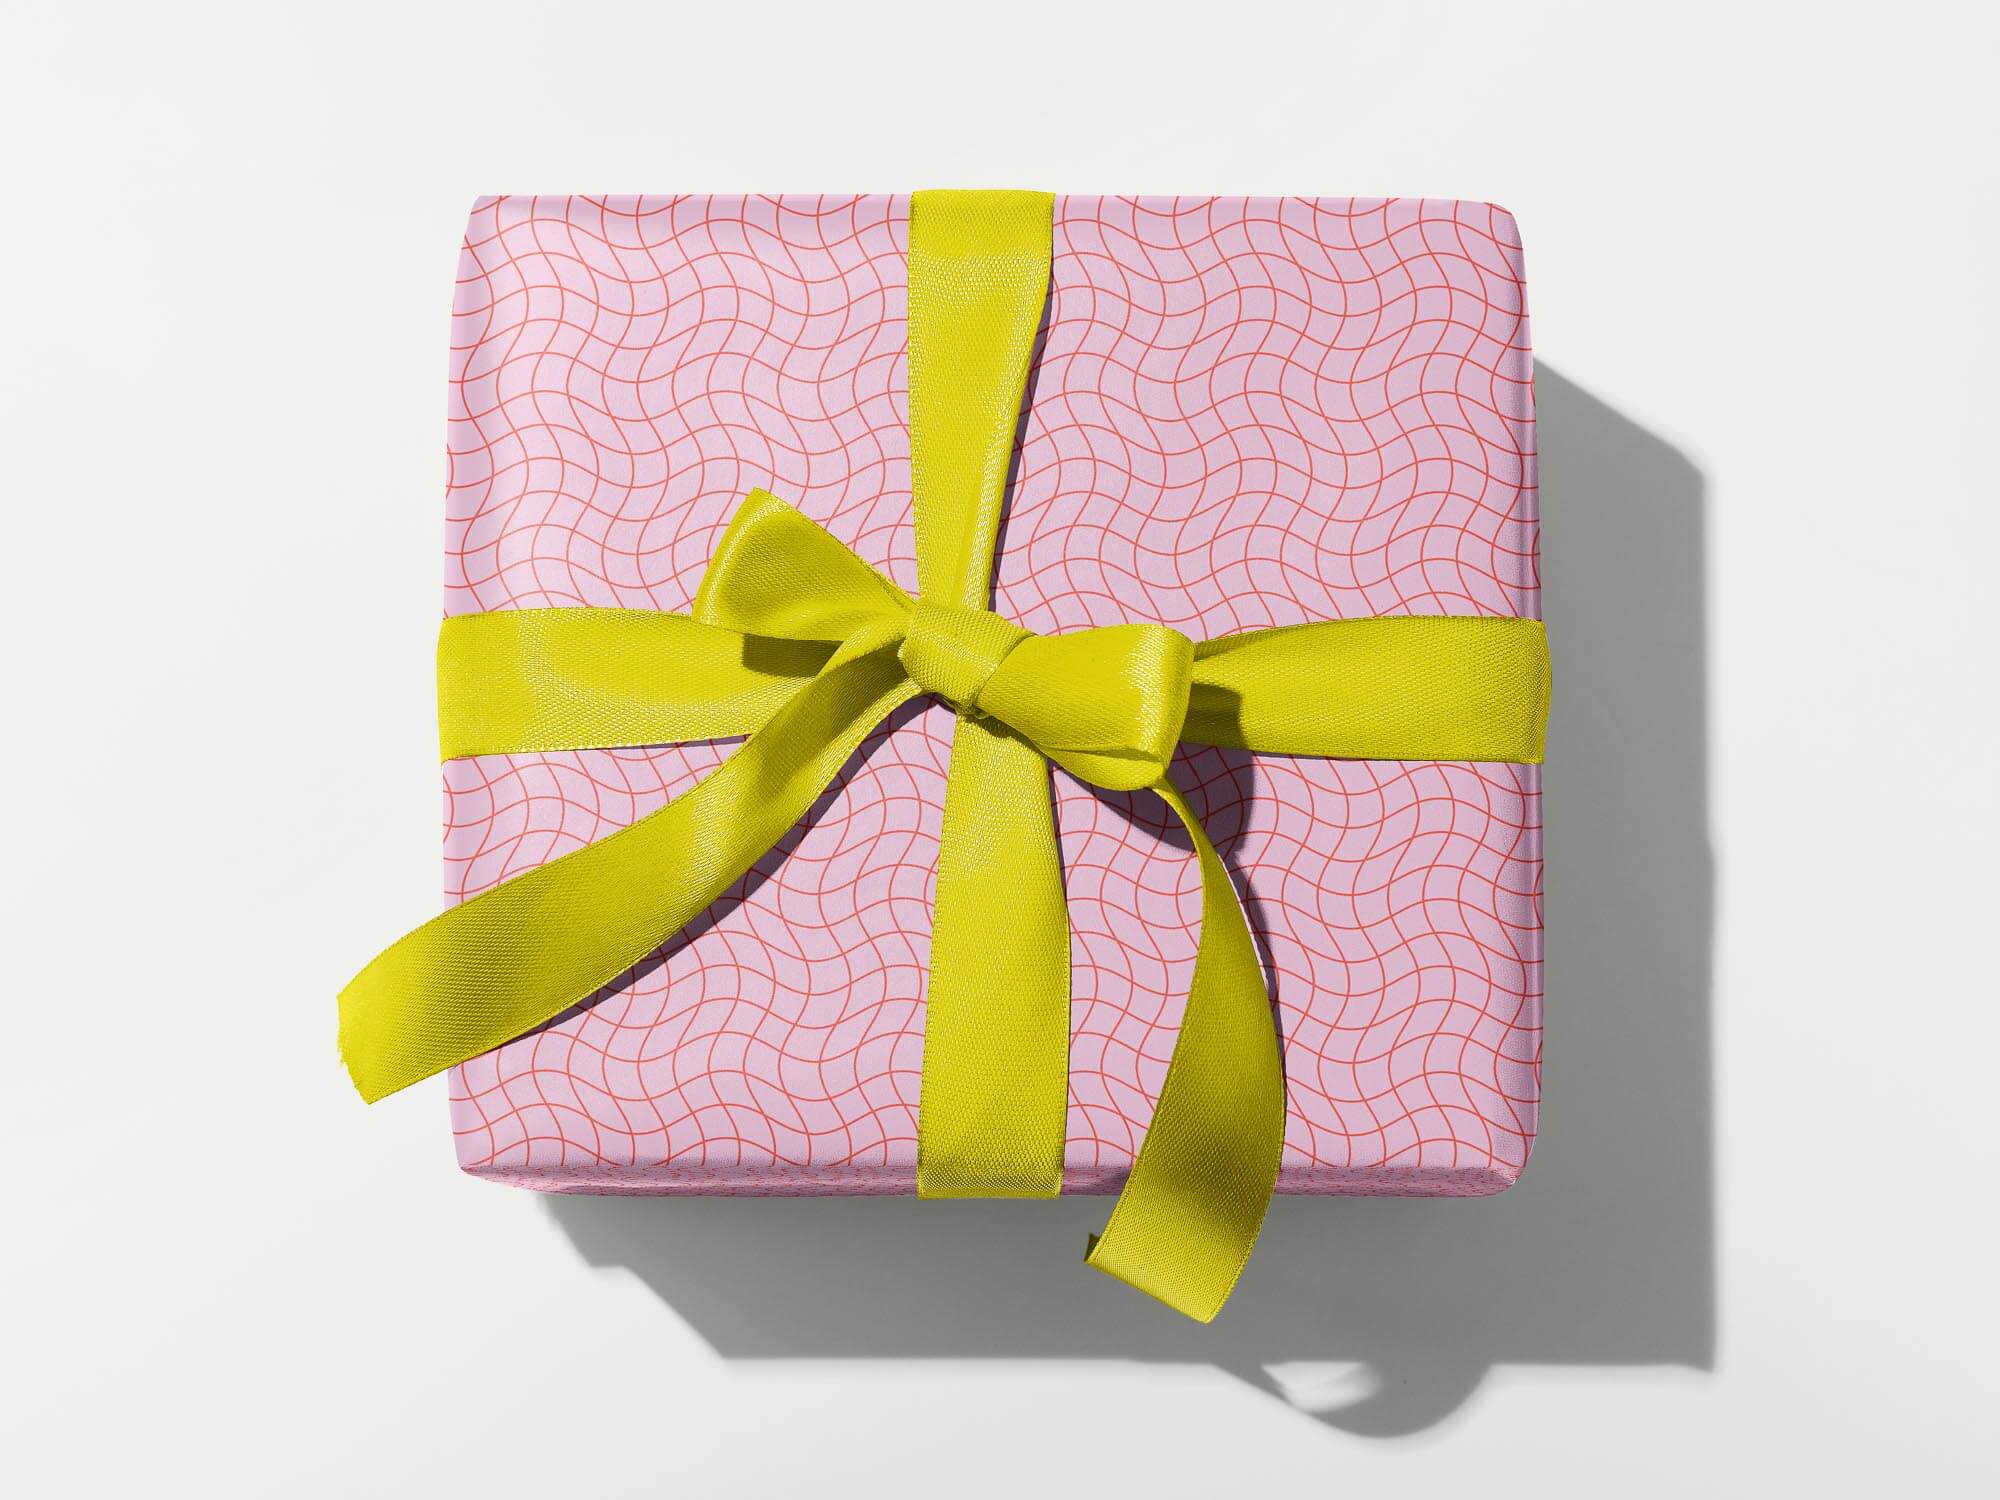 La Grid En Rose red and pink wavy grid pattern wrapping paper. Colorful, modern, gift wrapping sheets with fun prints and patterns by @mydarlin_bk. Made in USA.